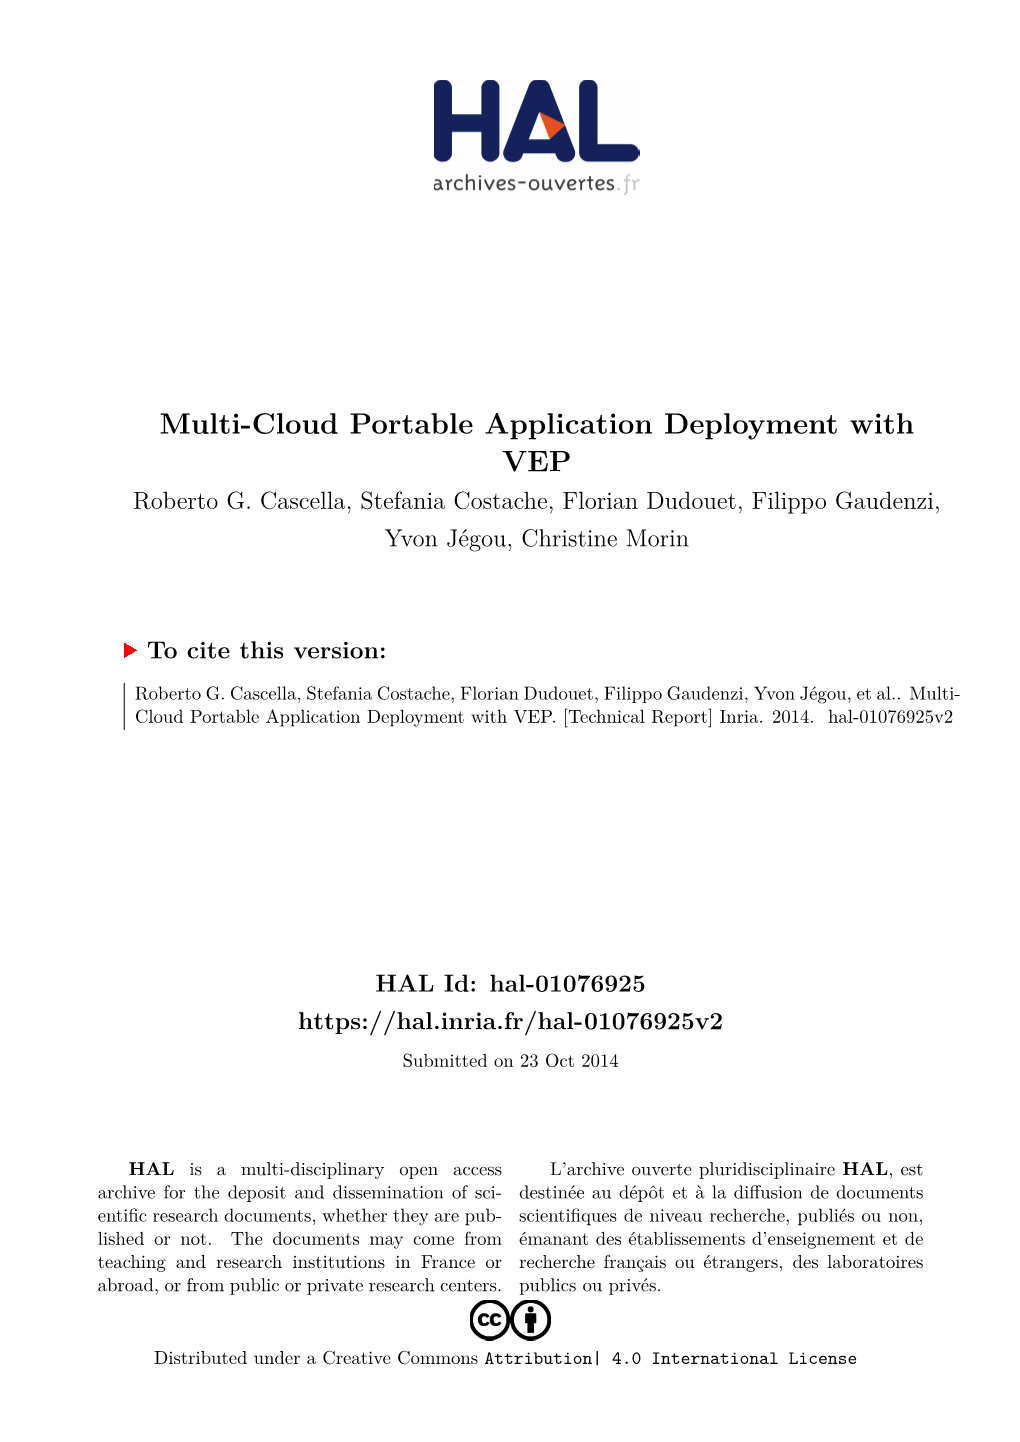 Multi-Cloud Portable Application Deployment with VEP Roberto G